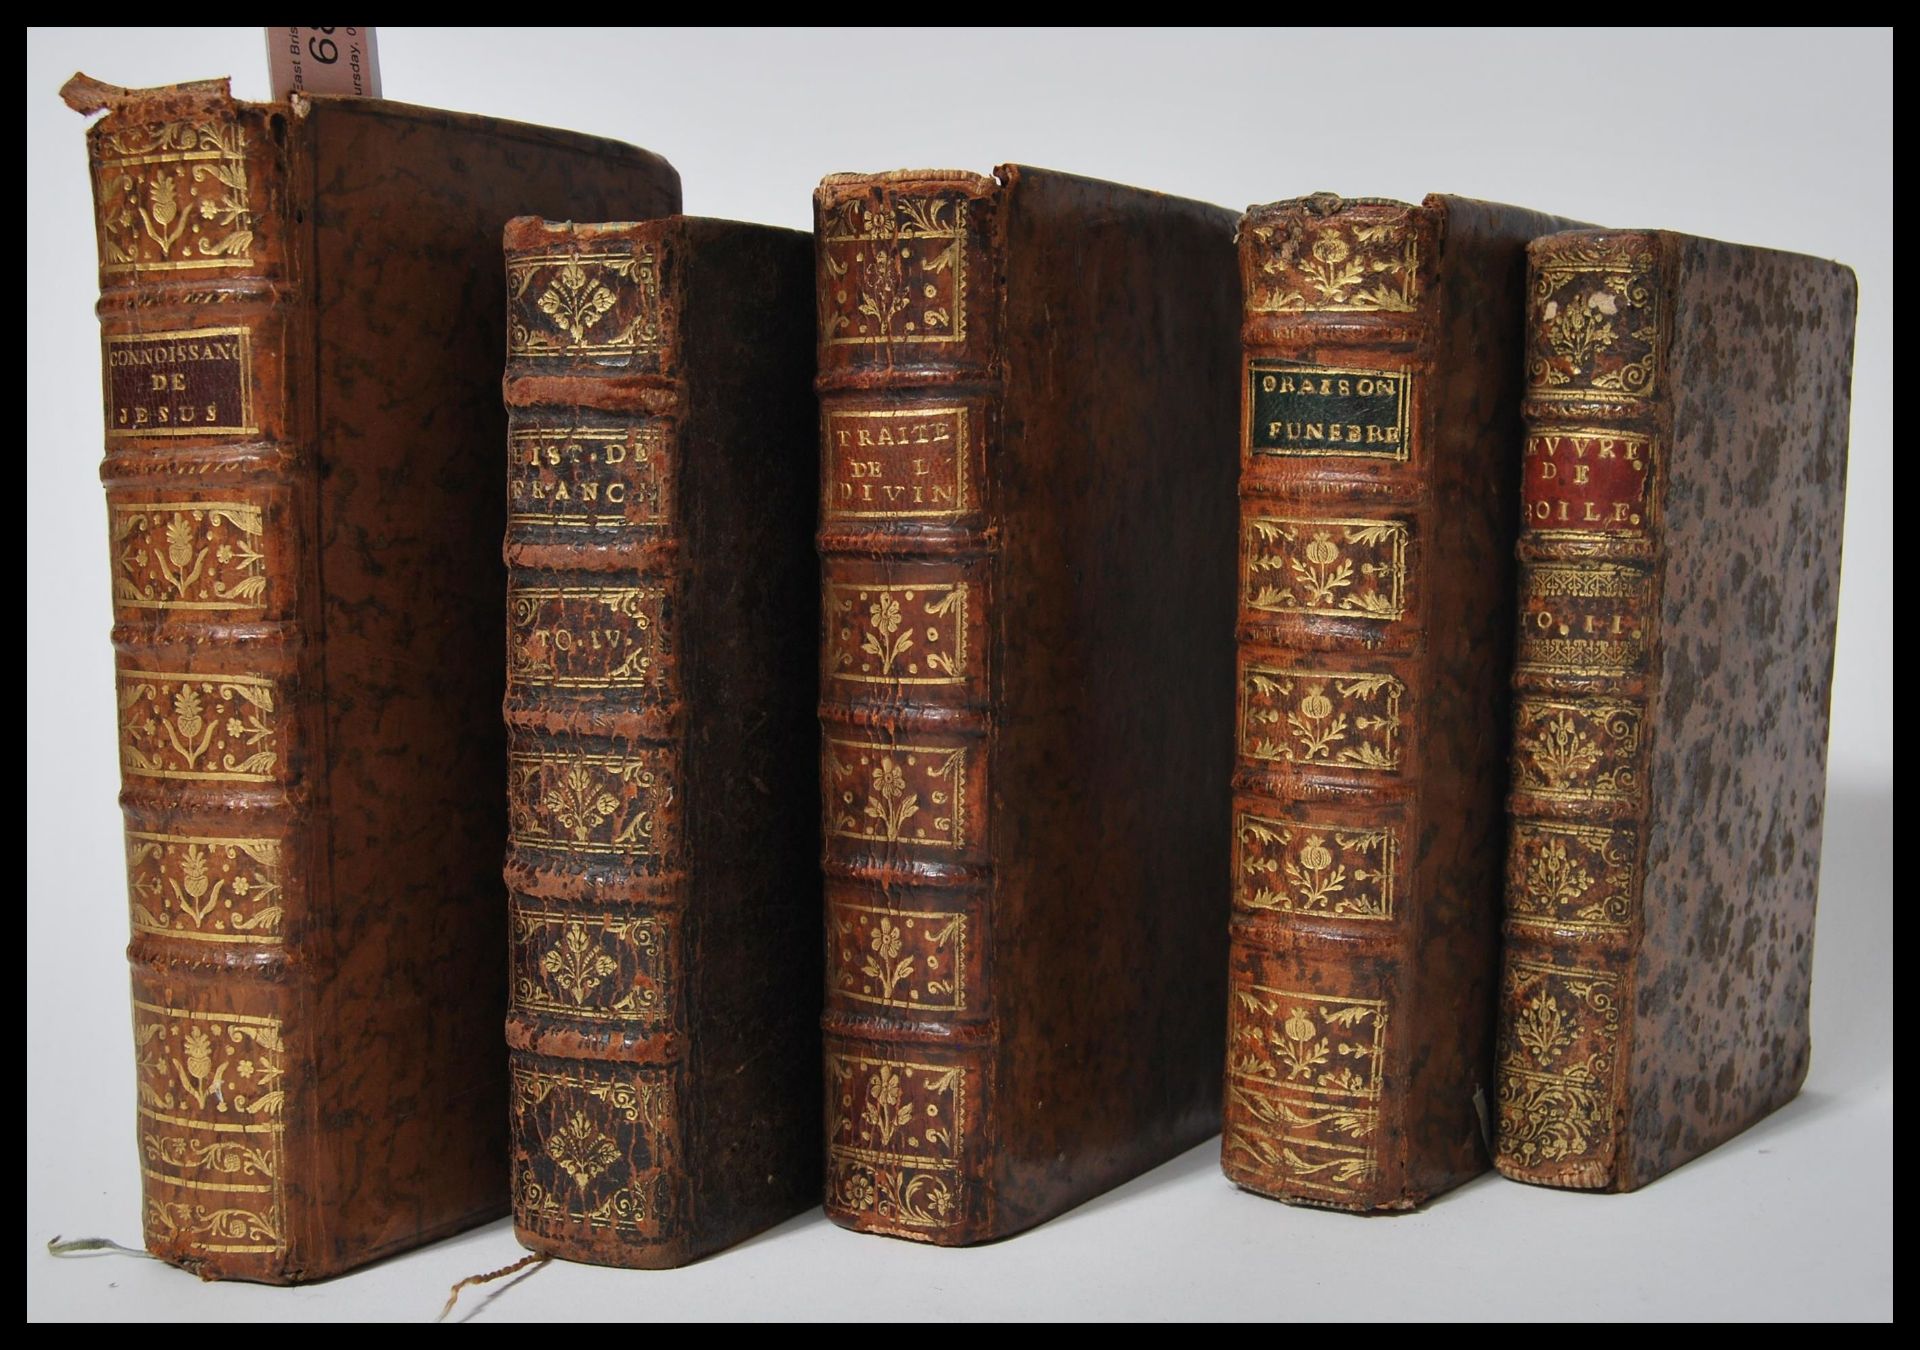 A collection of 17th/18th Century French religious books.